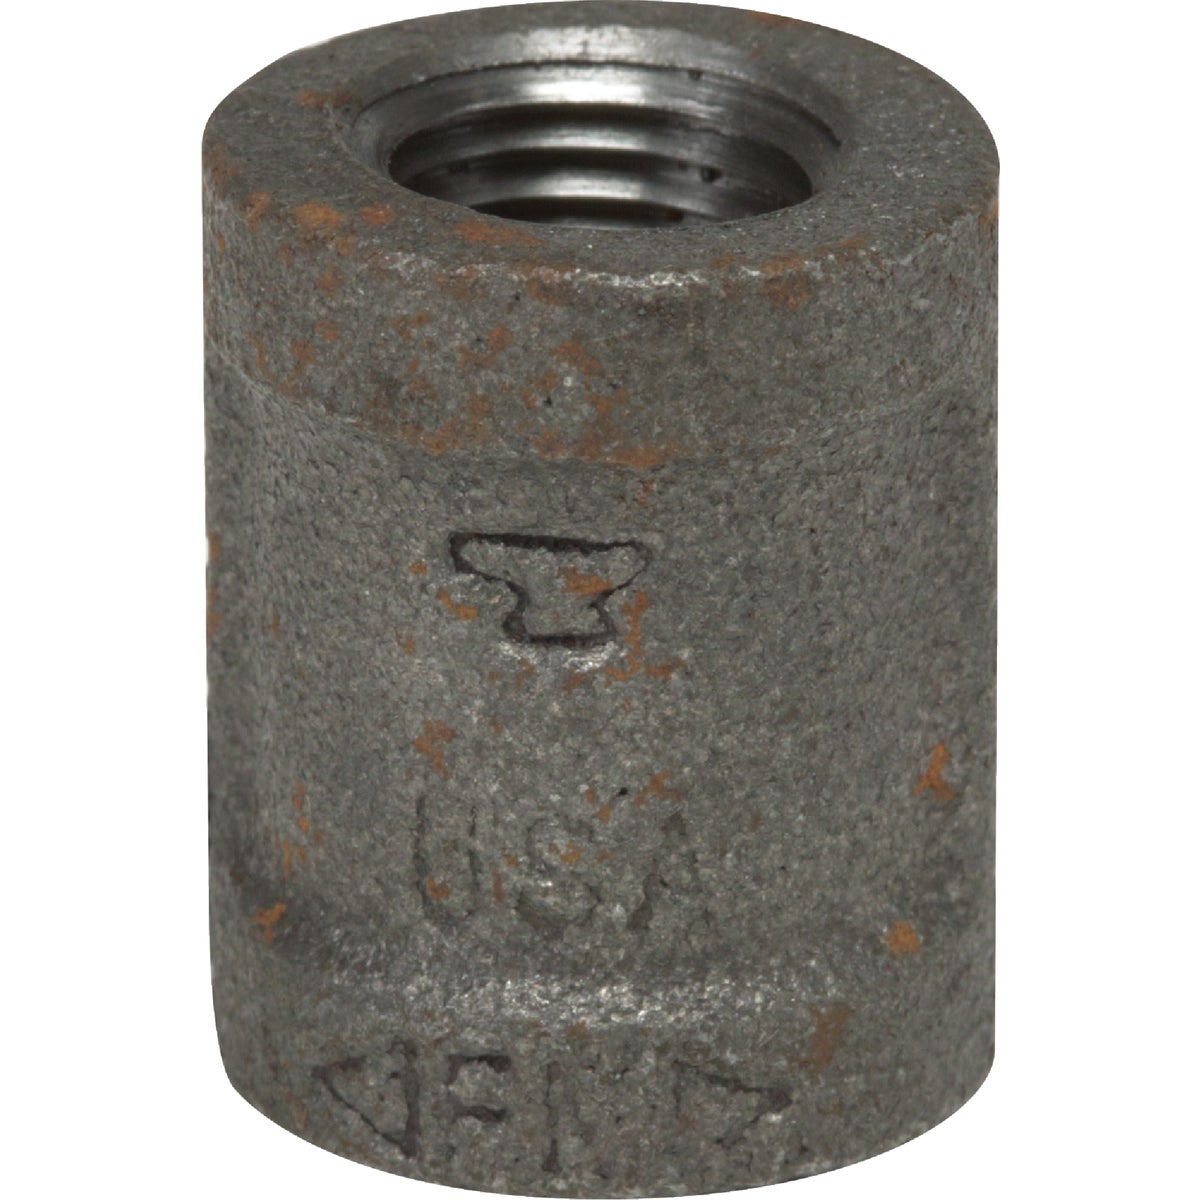 Item 434132, Malleable black iron pipe fitting made for tensile strength.